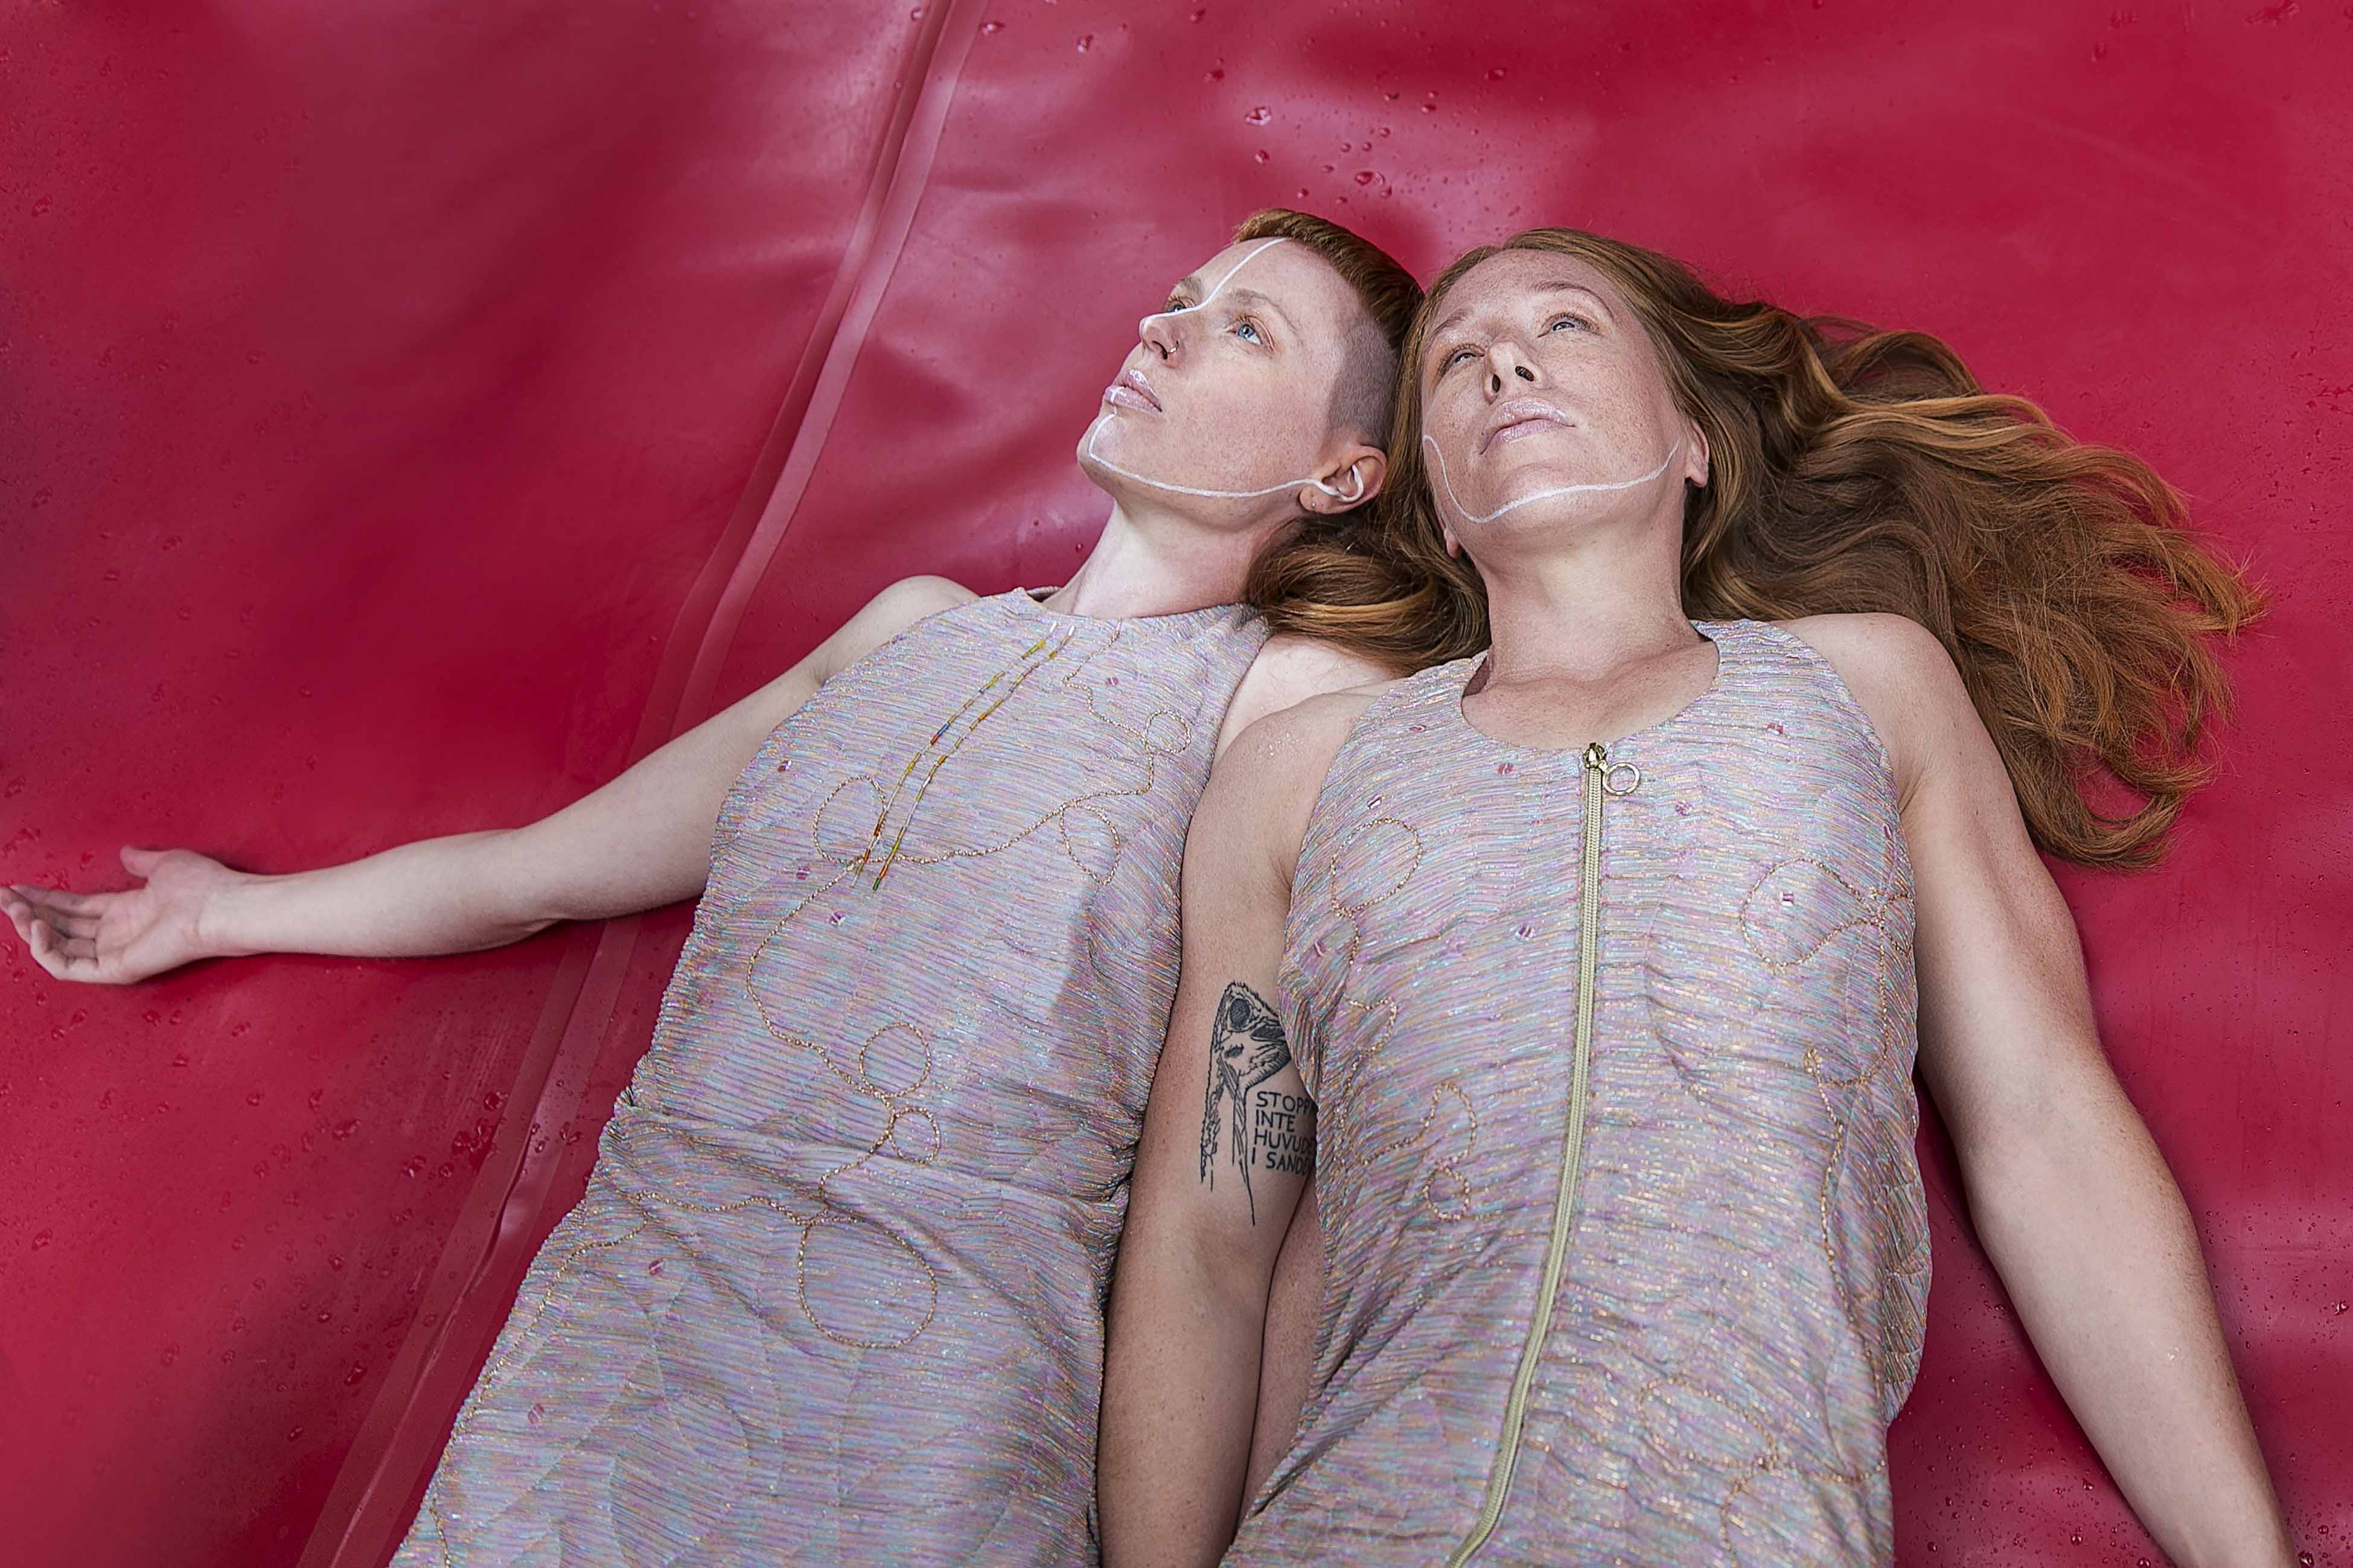 The image depicts dancers Hannah Karlsson and Felicia Sparrström who are lying down on a red backdrop, each have one arm outstretched. Both have red hair and are wearing costumes that glitter in pink and silver. Photo: Anna Ósk Erlingsdóttir